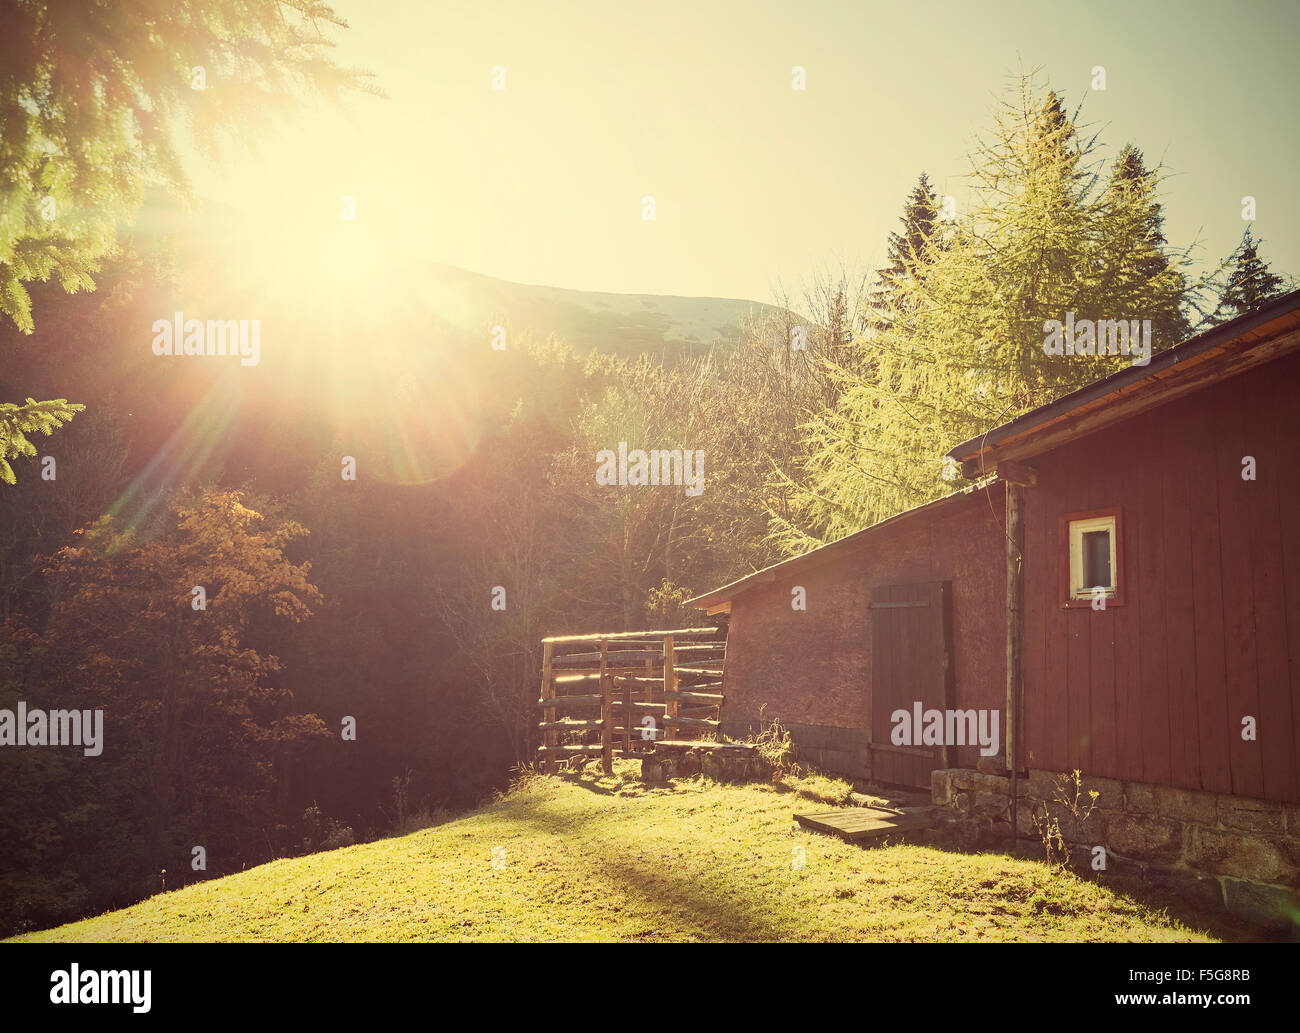 Retro vintage stylized mountain shelter against sun with flare effect. Stock Photo